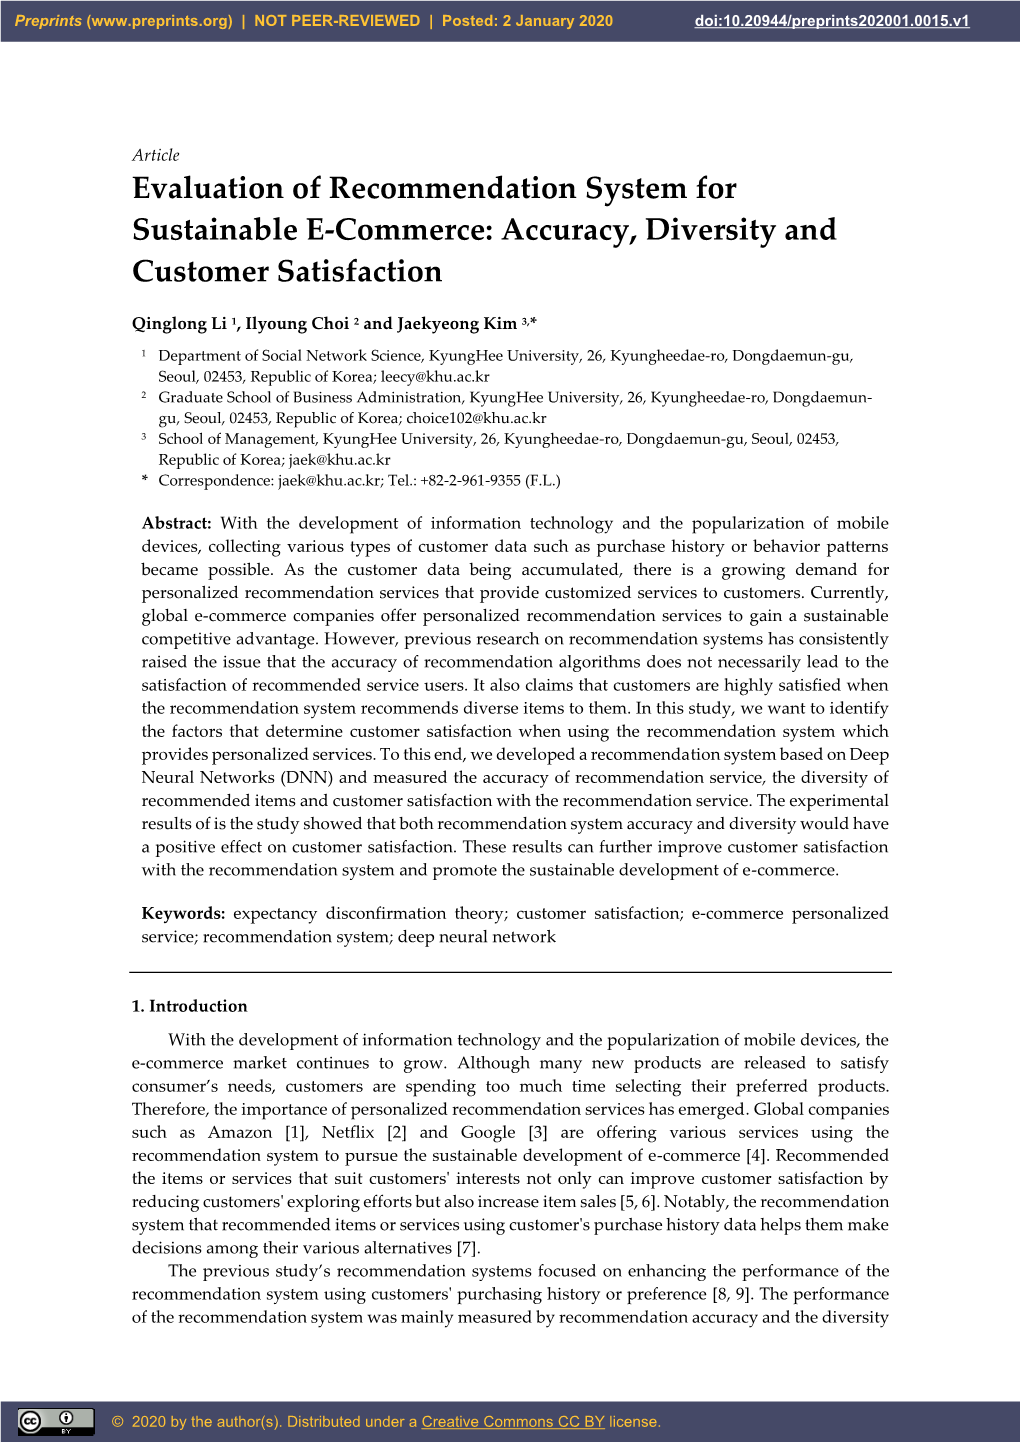 Evaluation of Recommendation System for Sustainable E-Commerce: Accuracy, Diversity and Customer Satisfaction